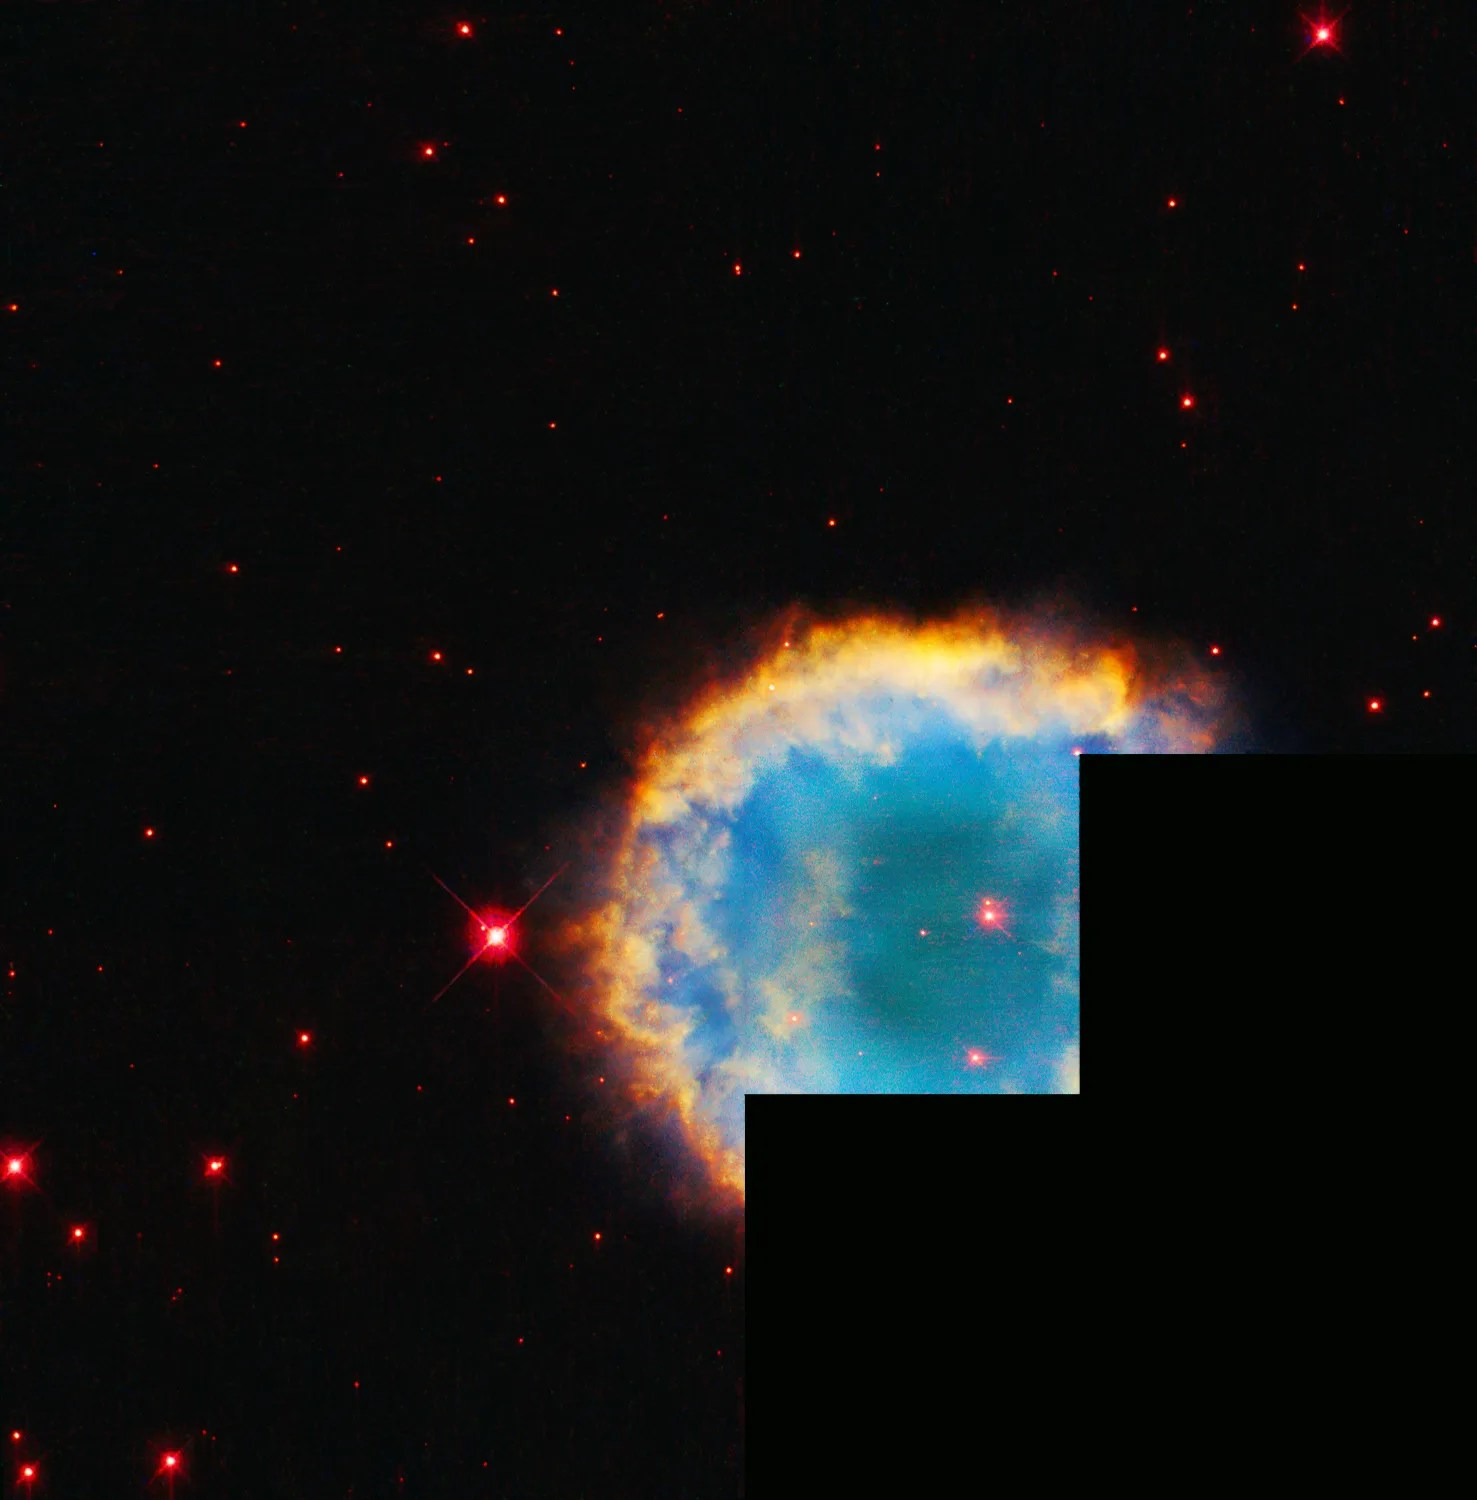 Red-orange and yellow ring the turquoise center of this spherical planetary nebula